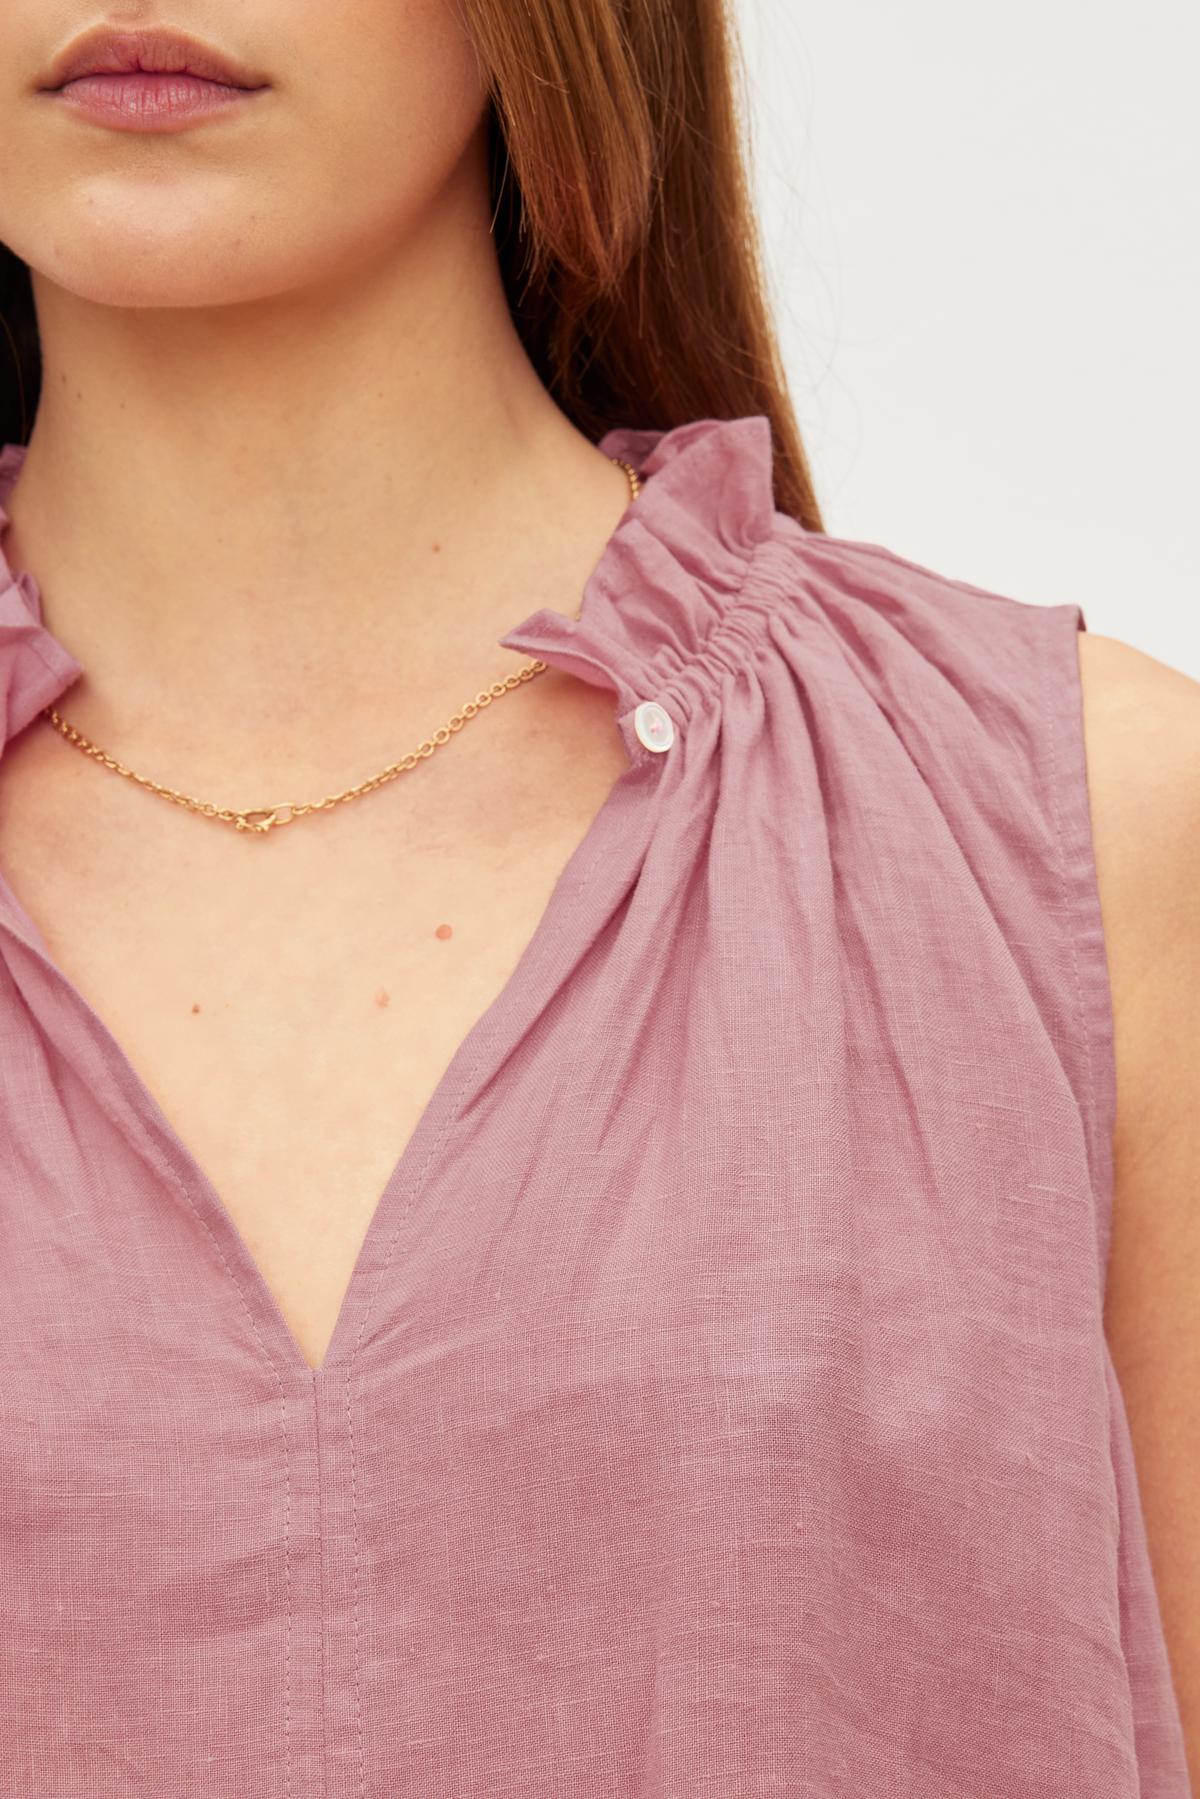   Close-up of a woman wearing a MASIE LINEN TANK TOP from Velvet by Graham & Spencer, with an elastic ruffle neckline and a delicate gold chain necklace with a small pendant. 